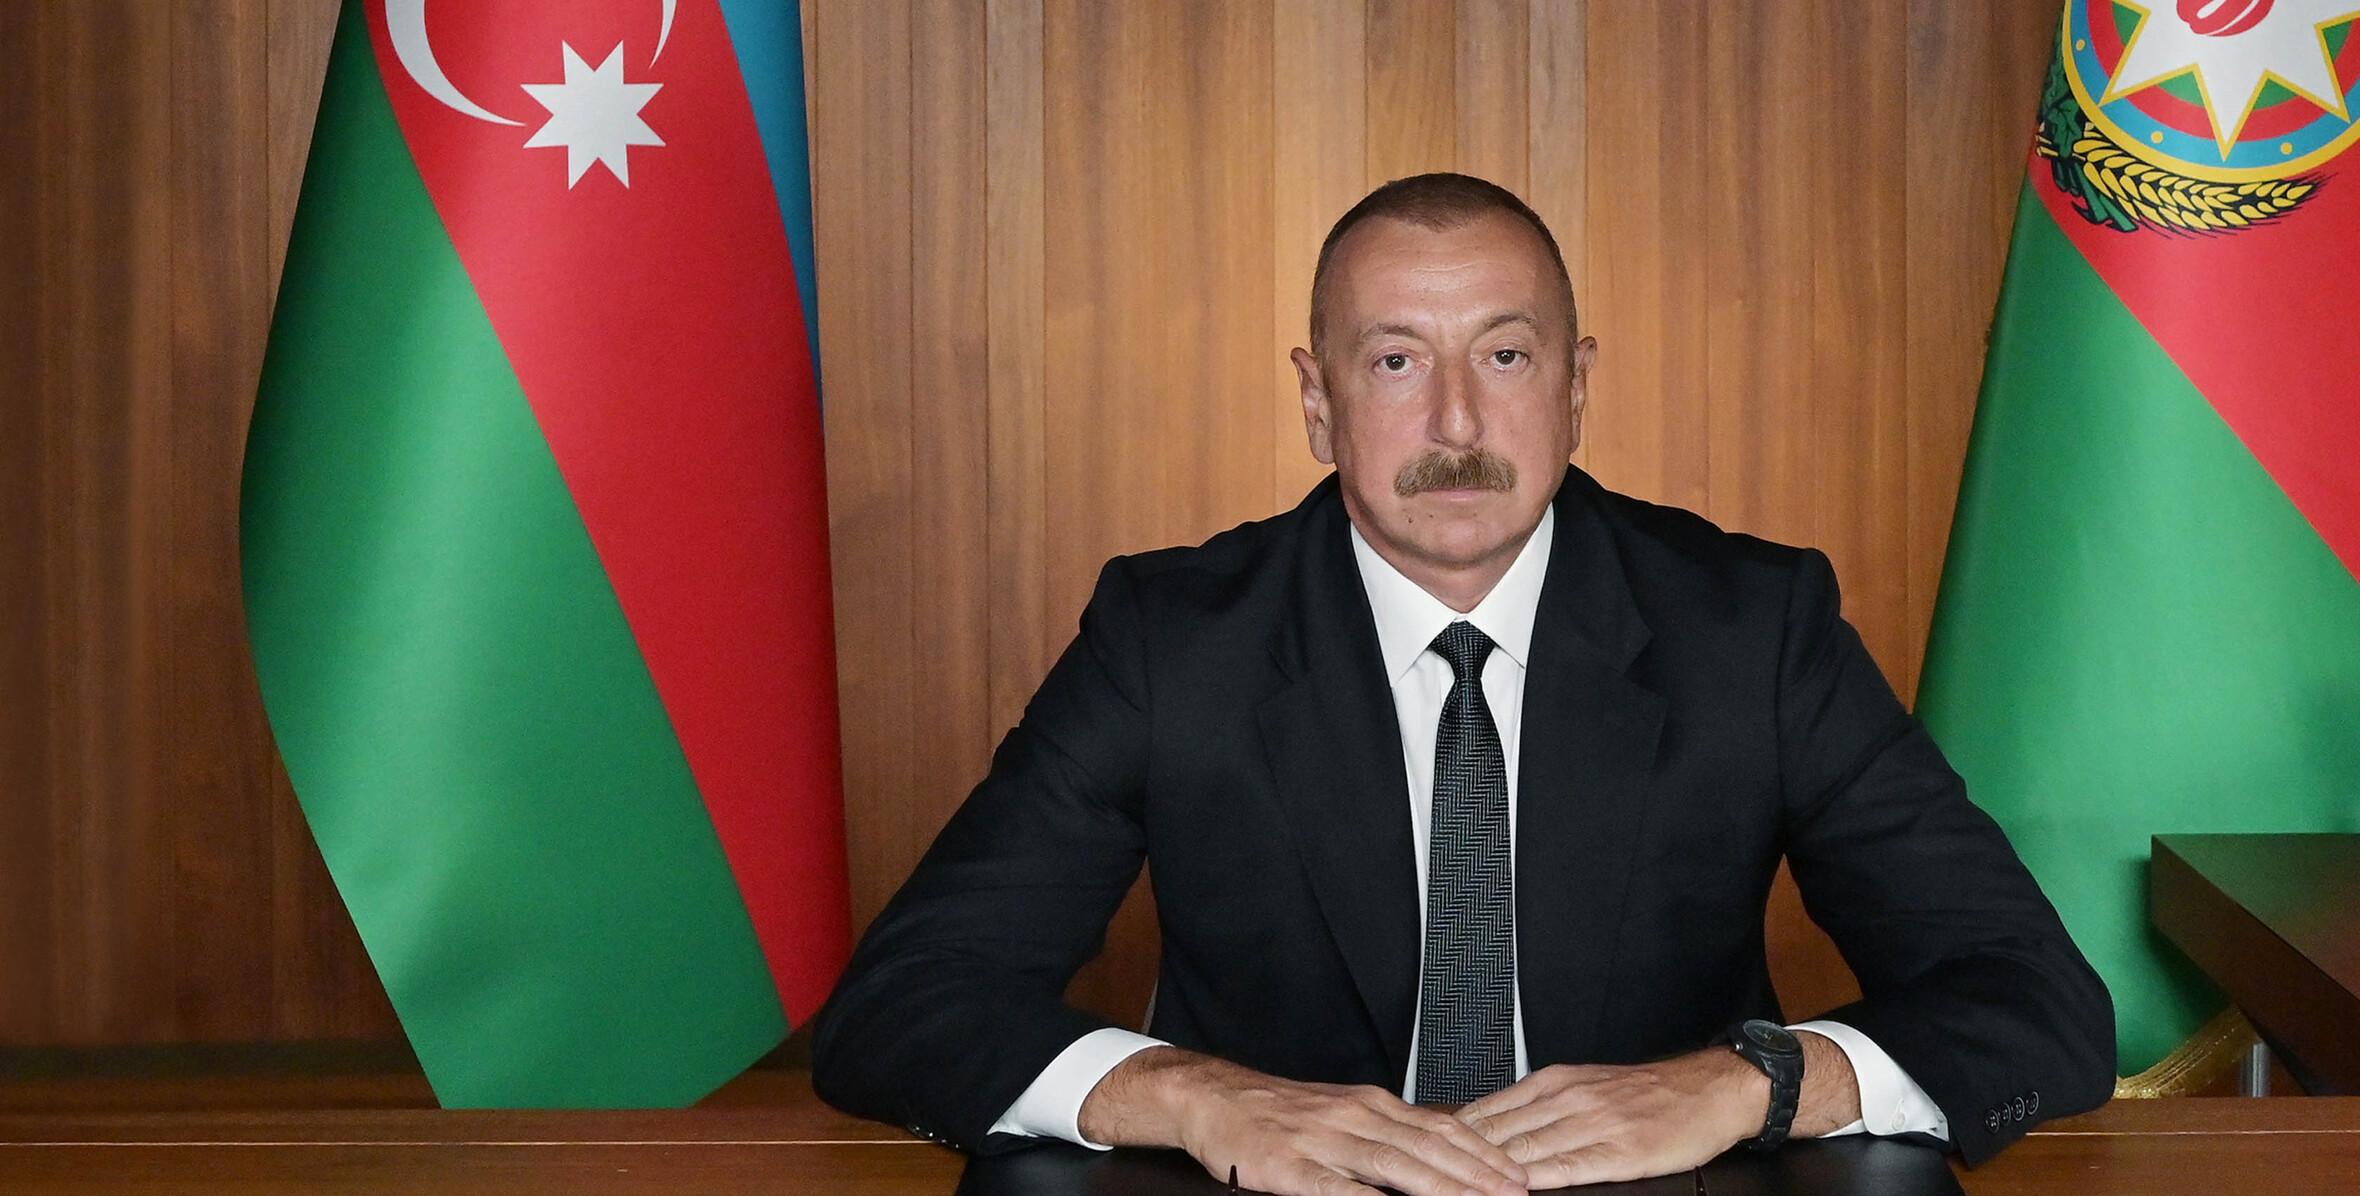 Speech by Ilham Aliyev at the meeting of the 75th anniversary of United Nations